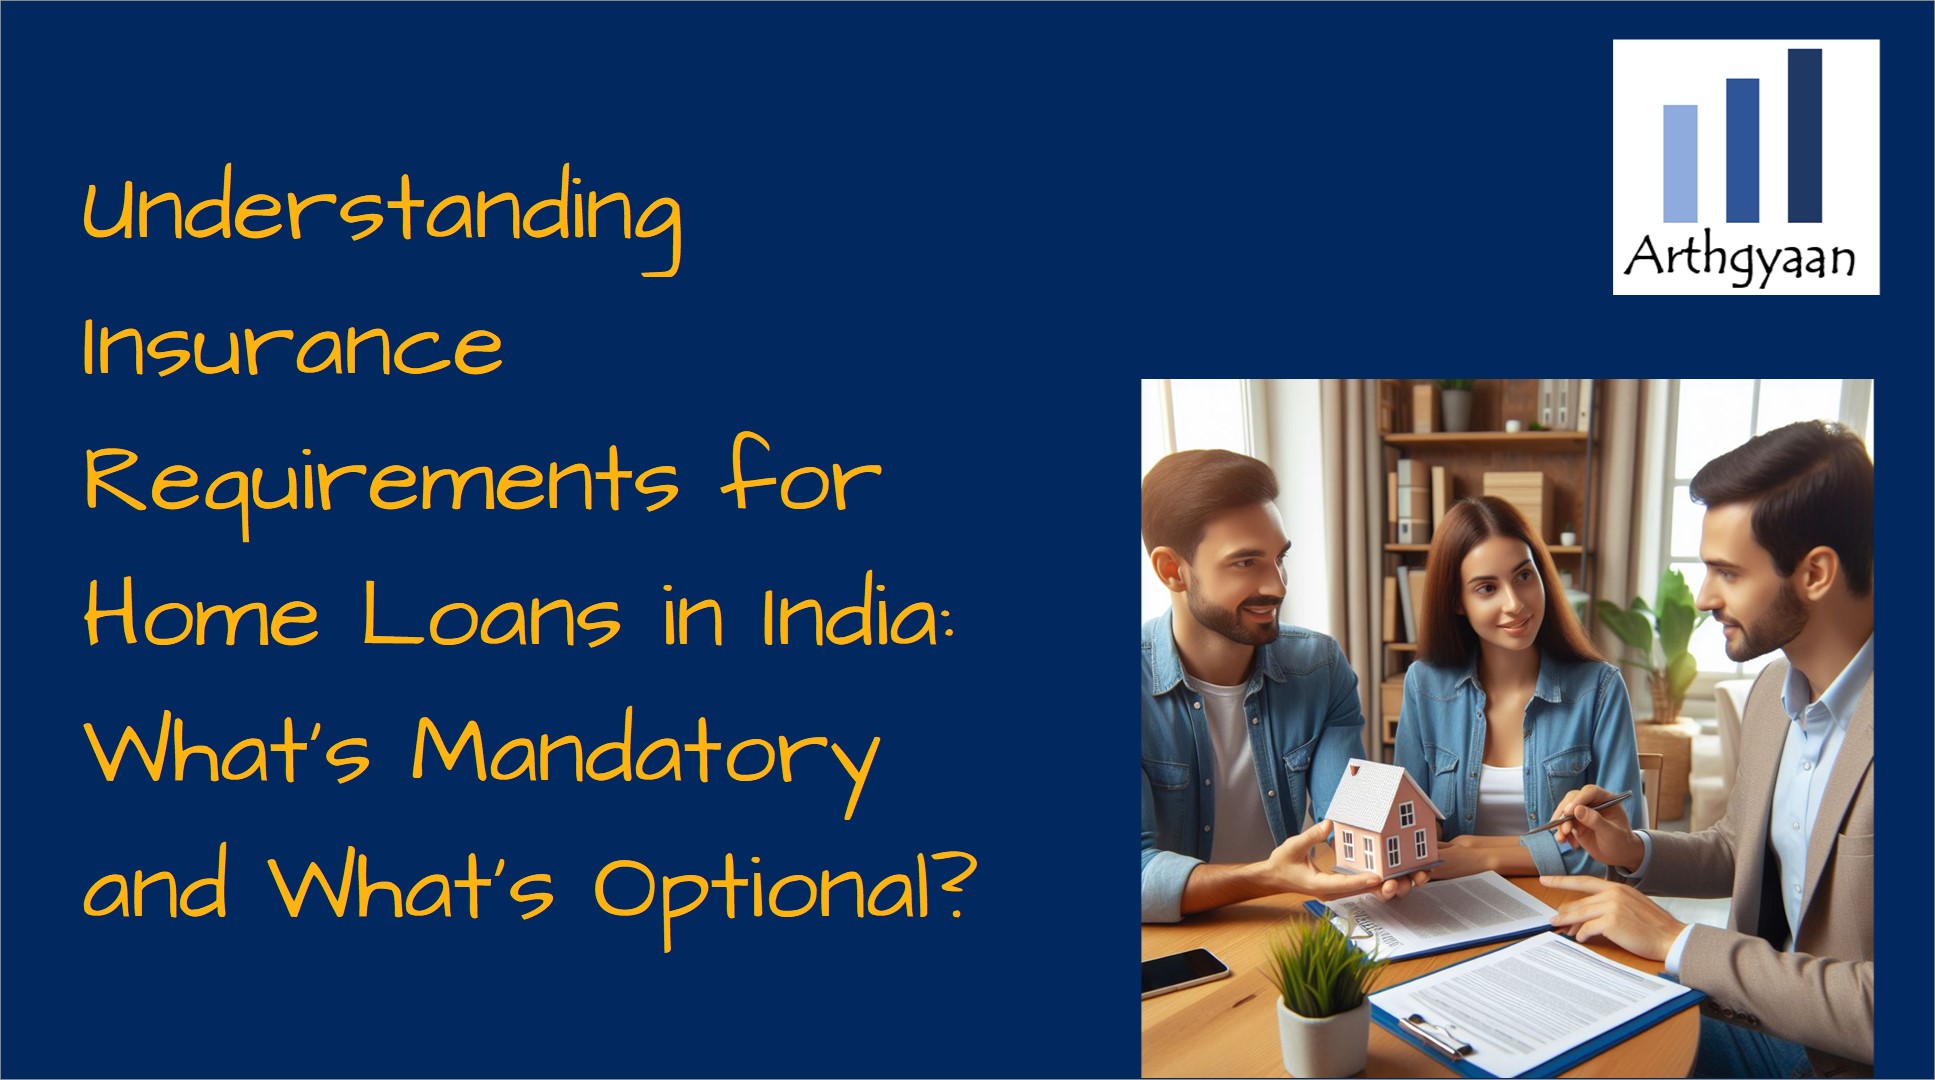 Understanding Insurance Requirements for Home Loans in India: What's Mandatory and What's Optional?